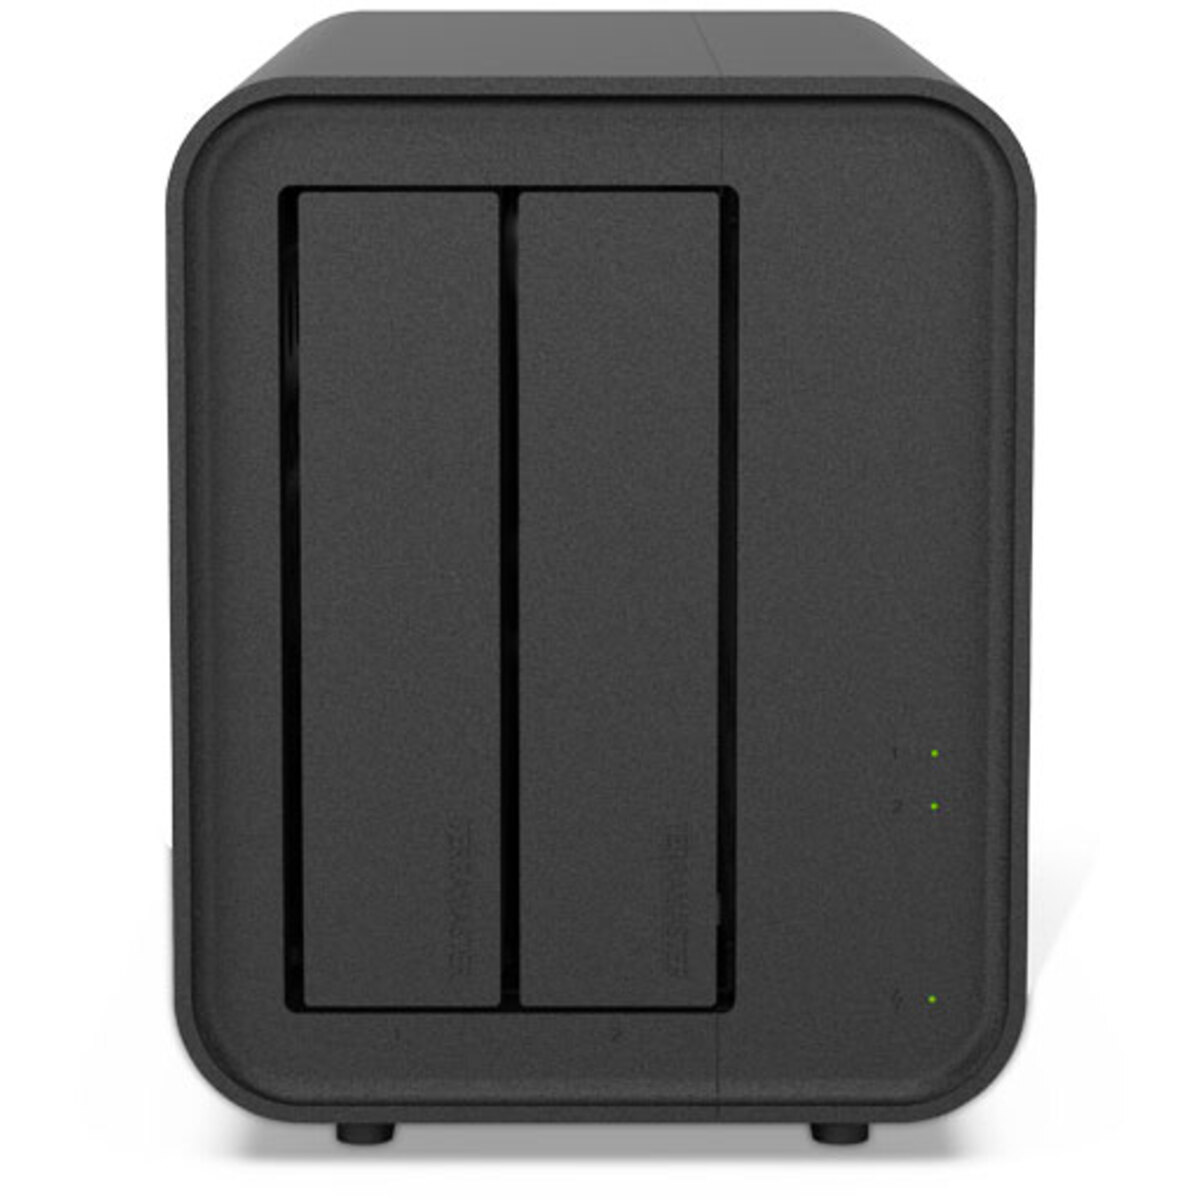 TerraMaster F2-424 24tb 2-Bay Desktop Multimedia / Power User / Business NAS - Network Attached Storage Device 2x12tb Seagate IronWolf Pro ST12000NT001 3.5 7200rpm SATA 6Gb/s HDD NAS Class Drives Installed - Burn-In Tested - ON SALE F2-424